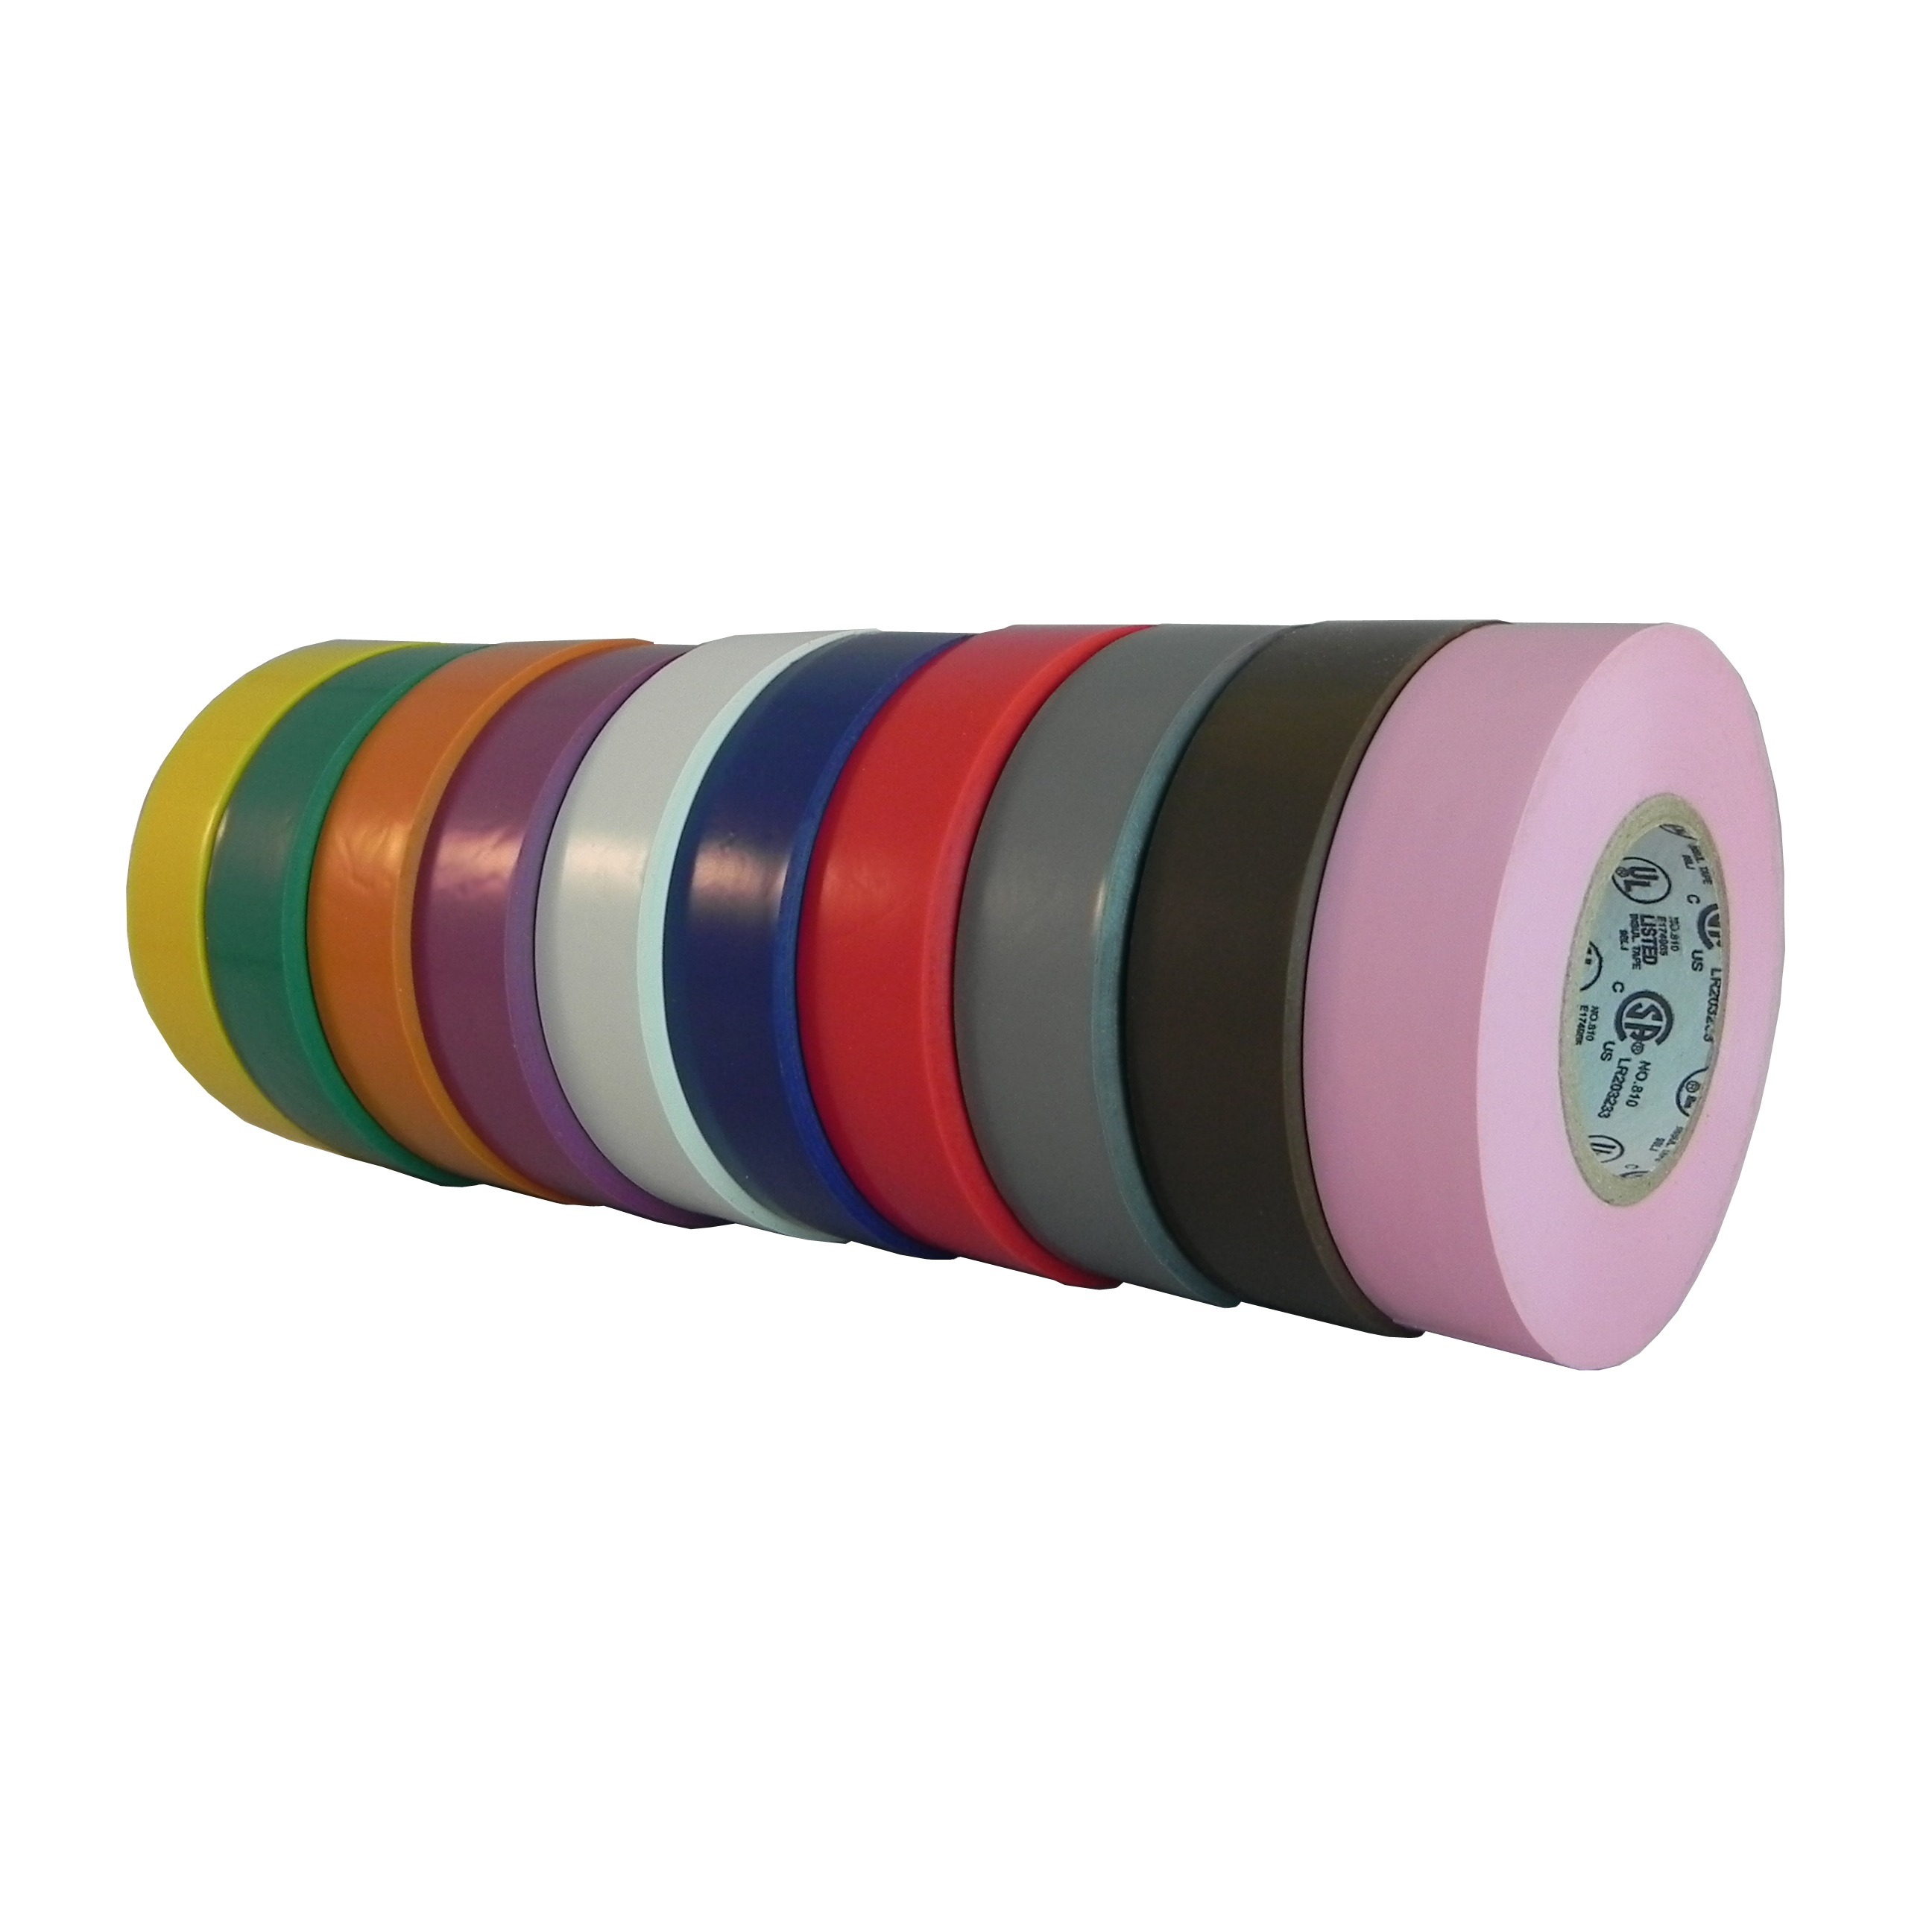 JVCC E-Tape Colored Electrical Tape [7 mils thick]: 3/4 in. x 66 ft. (Red)  